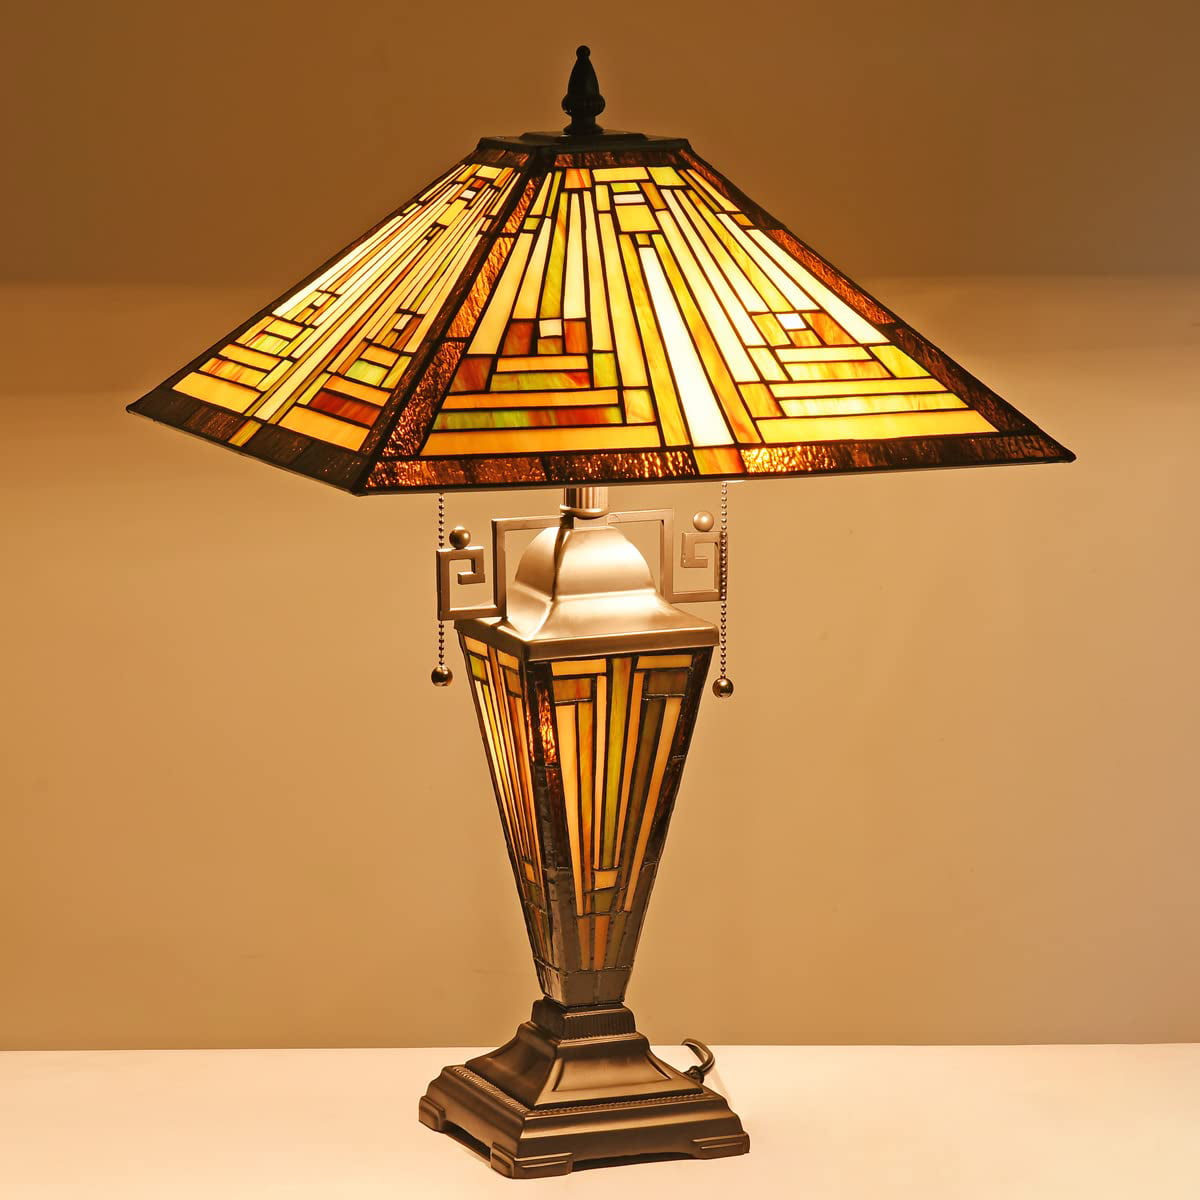 Vinplus  Table Lamp Night Light 16" Wide Handmade Stained Glass Lamp Shade 3 Light Amber Mission Style Vintage Table Lamp